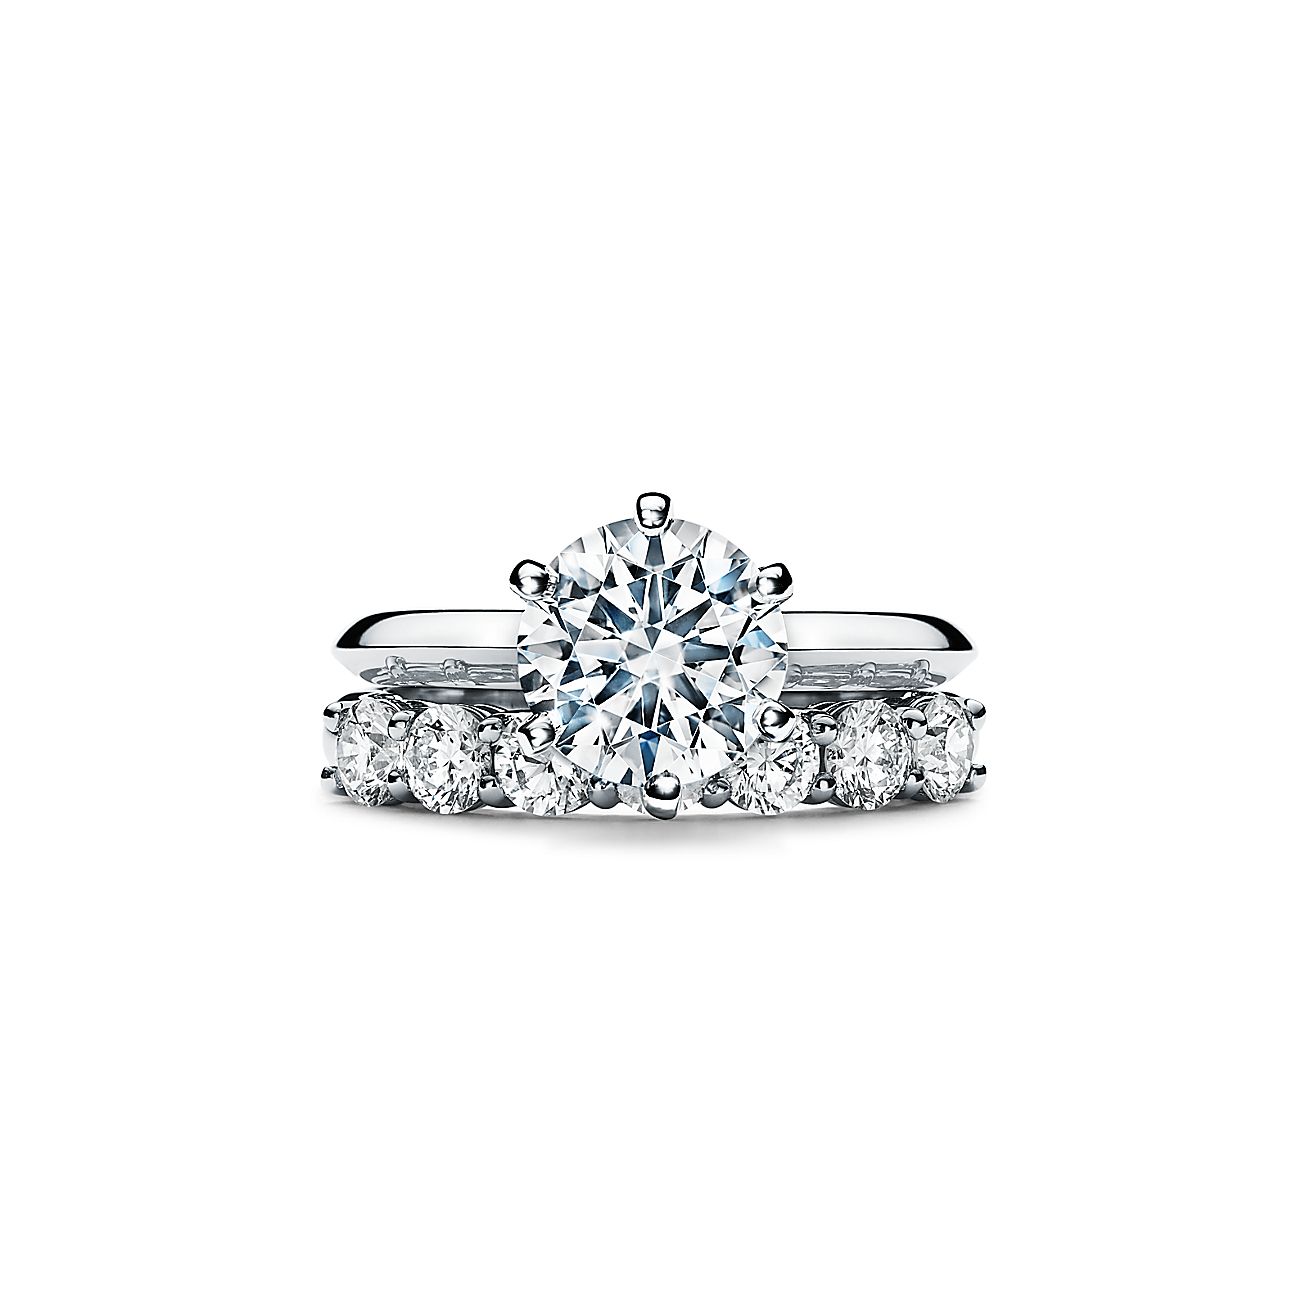 Featured image of post Instagram Tiffany And Co Engagement Ring : Our luxury engagement ring experts will explain how much tiffany engagement rings cost and how expensive they are, why they command their prices.